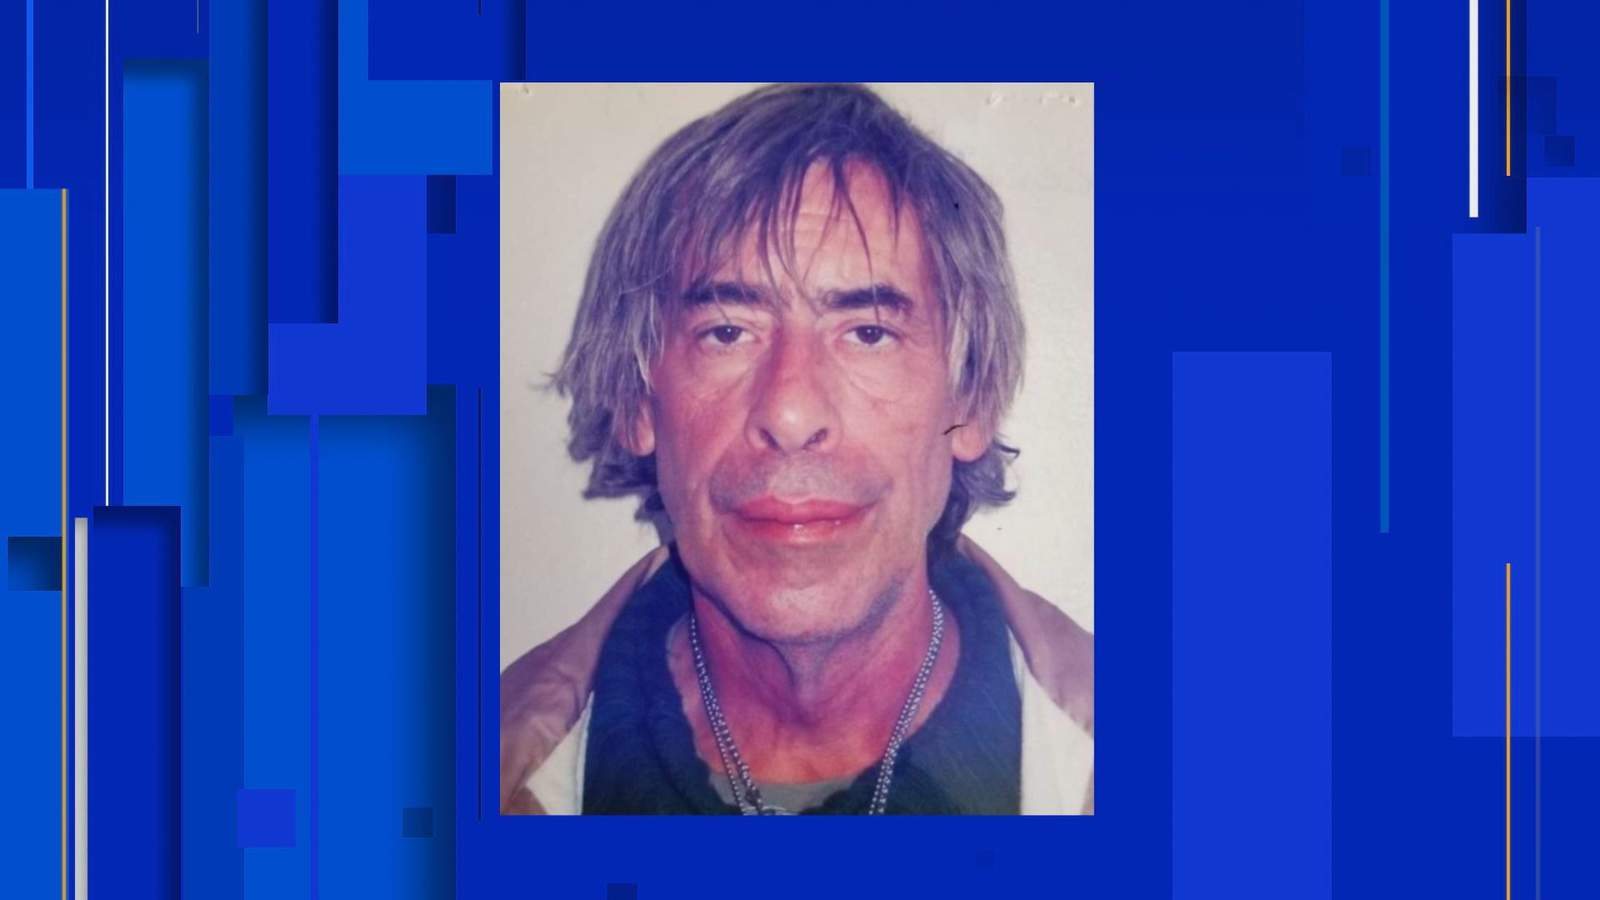 Tip from citizen helps police locate 63-year-old man not seen for weeks